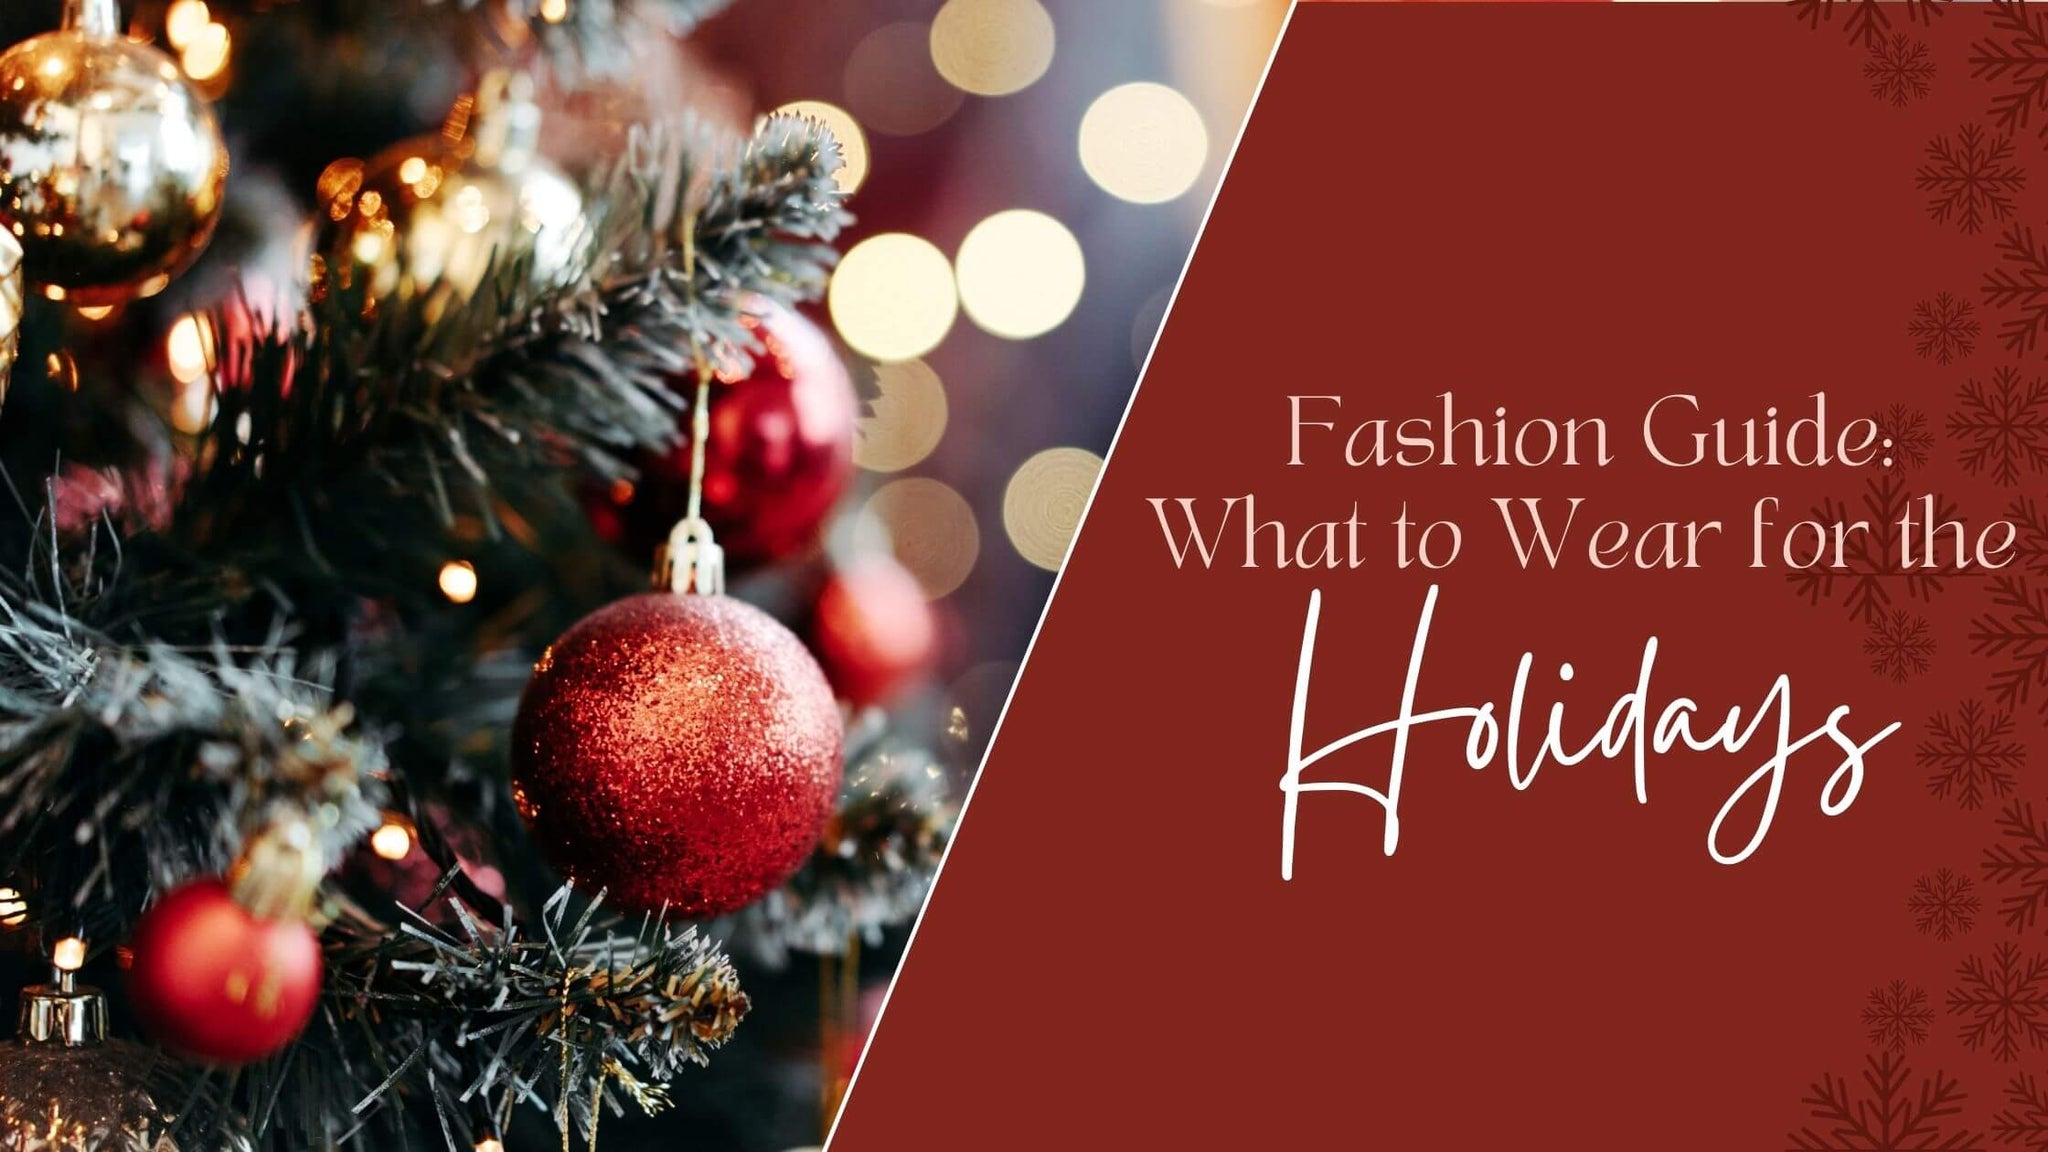 Fashion Guide: What to Wear for the Holidays